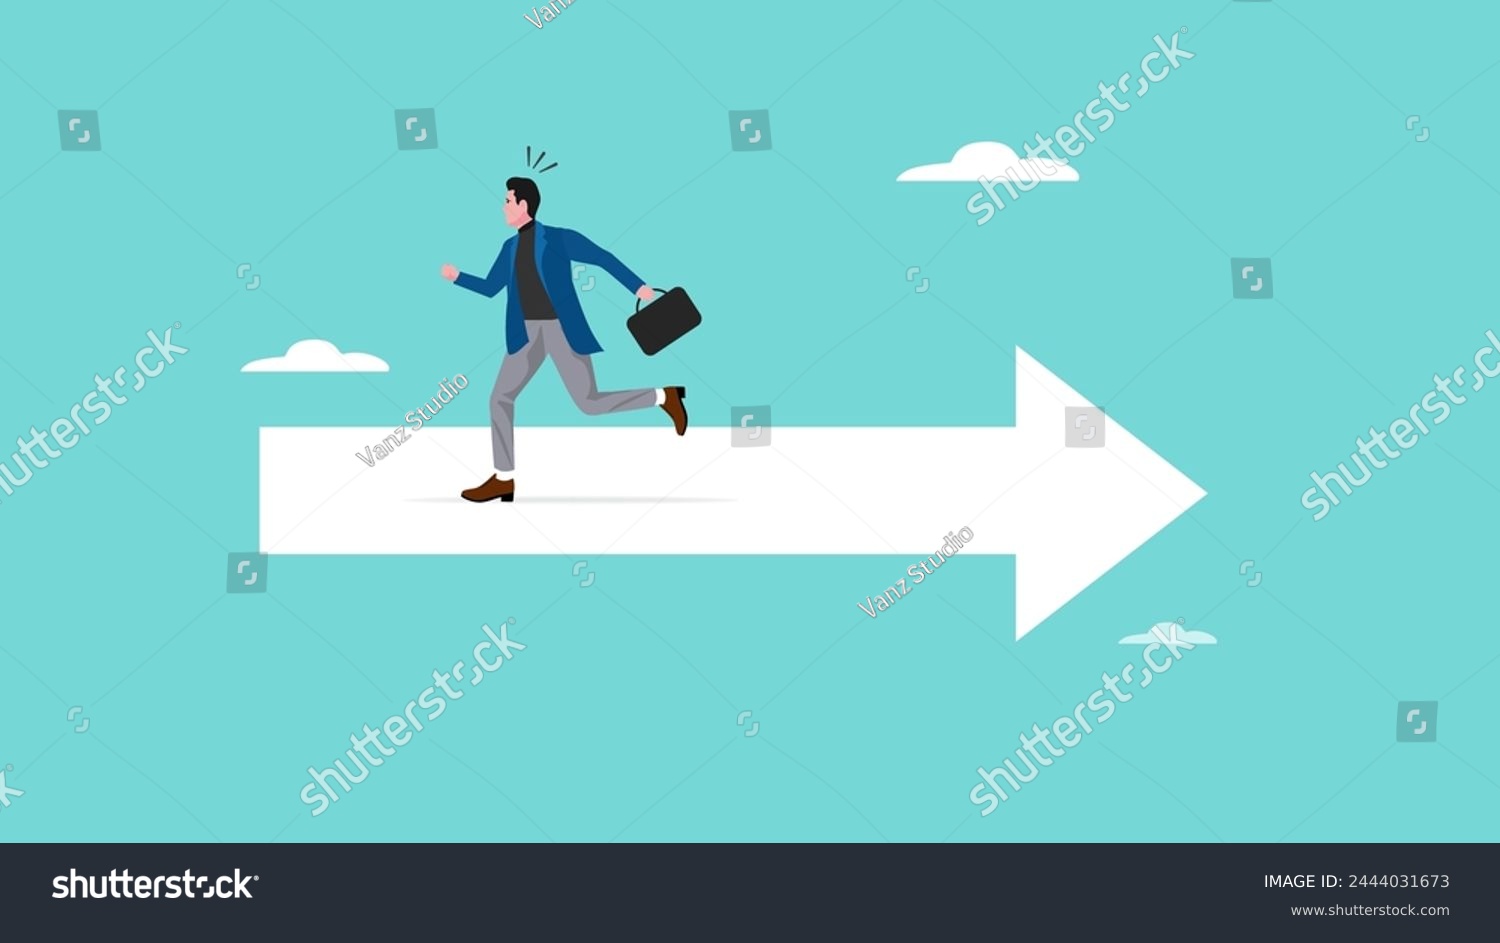 SVG of wrong direction lead to mistake, mislead or false to get lost concept, leadership decision to be difference or opposite, Confused businessman running in wrong opposite direction of trend arrow svg